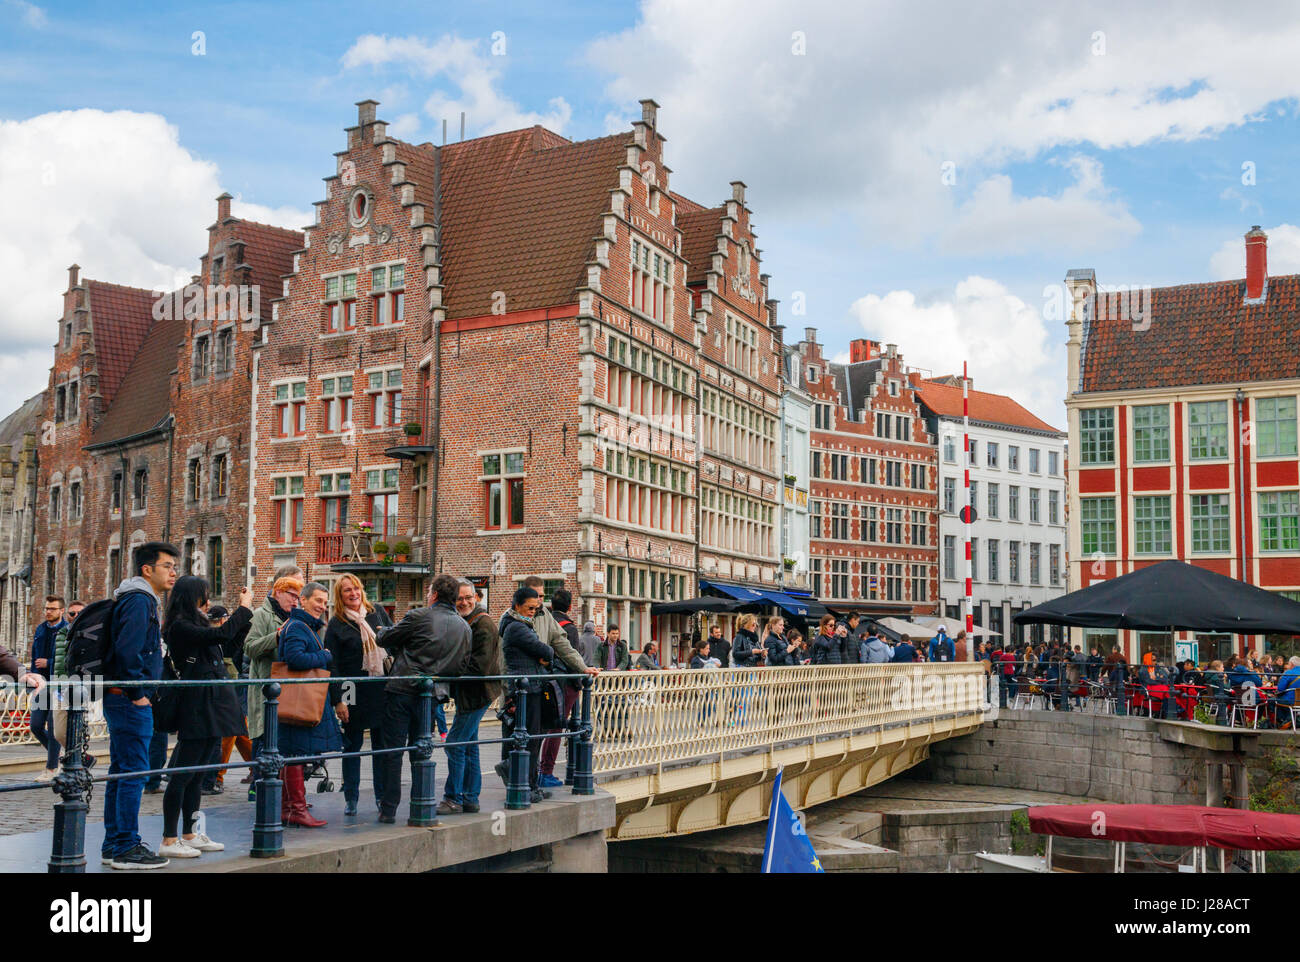 View of tourists and the streets Graslei (Grass Quay), Vleeshuistragel and Hooiaard with their medieval buildings under a blue sky. Ghent, Belgium. Stock Photo